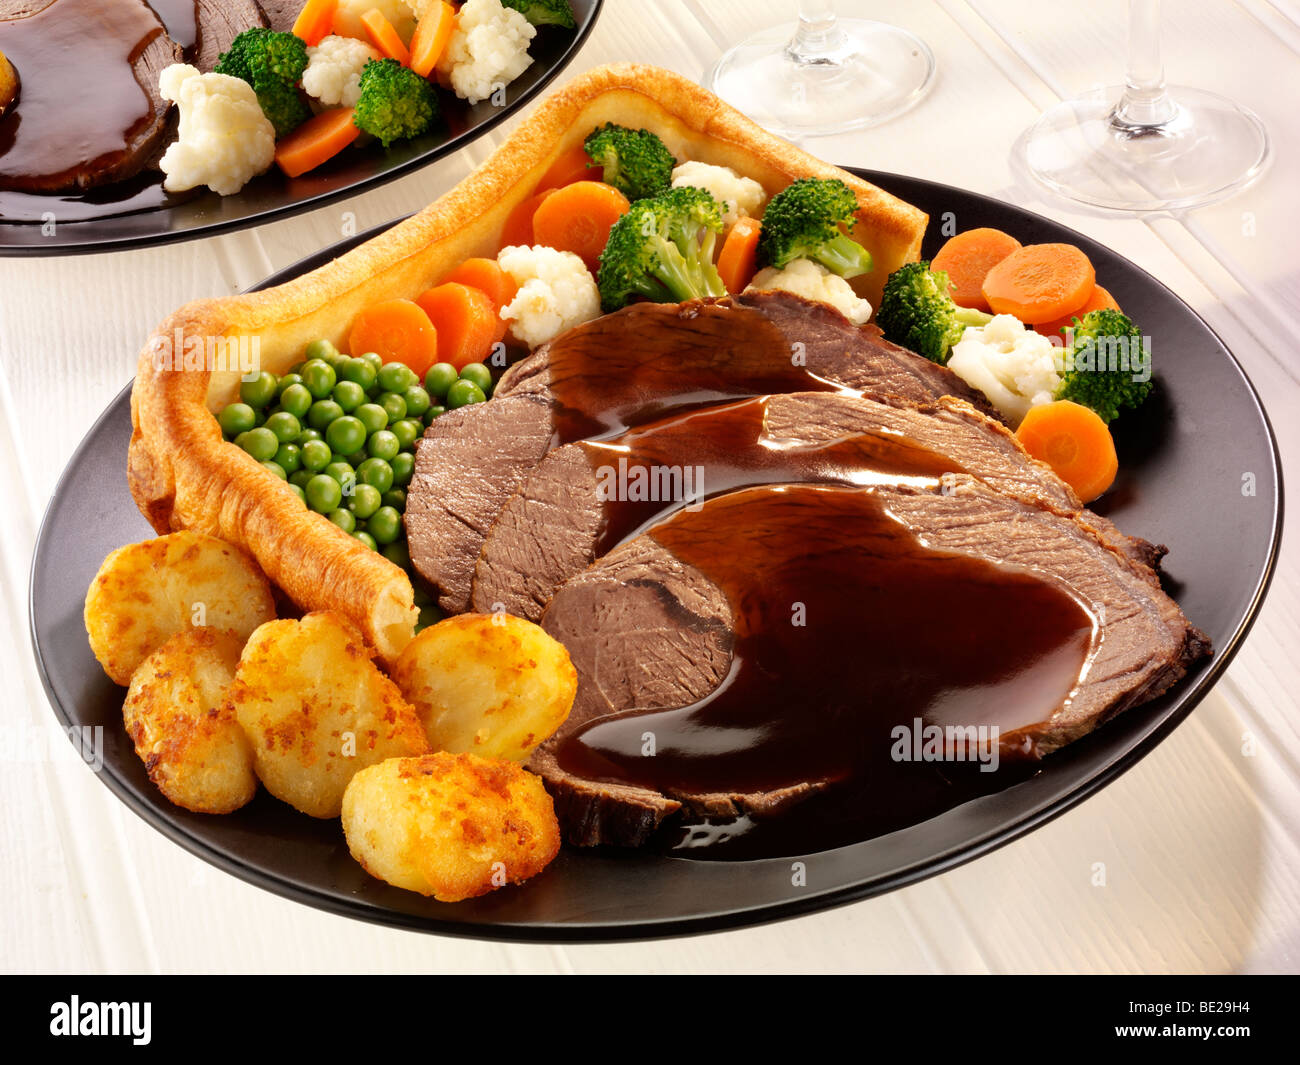 TRADITIONAL ROAST BEEF DINNER WITH YORKSHIRE PUDDING Stock Photo